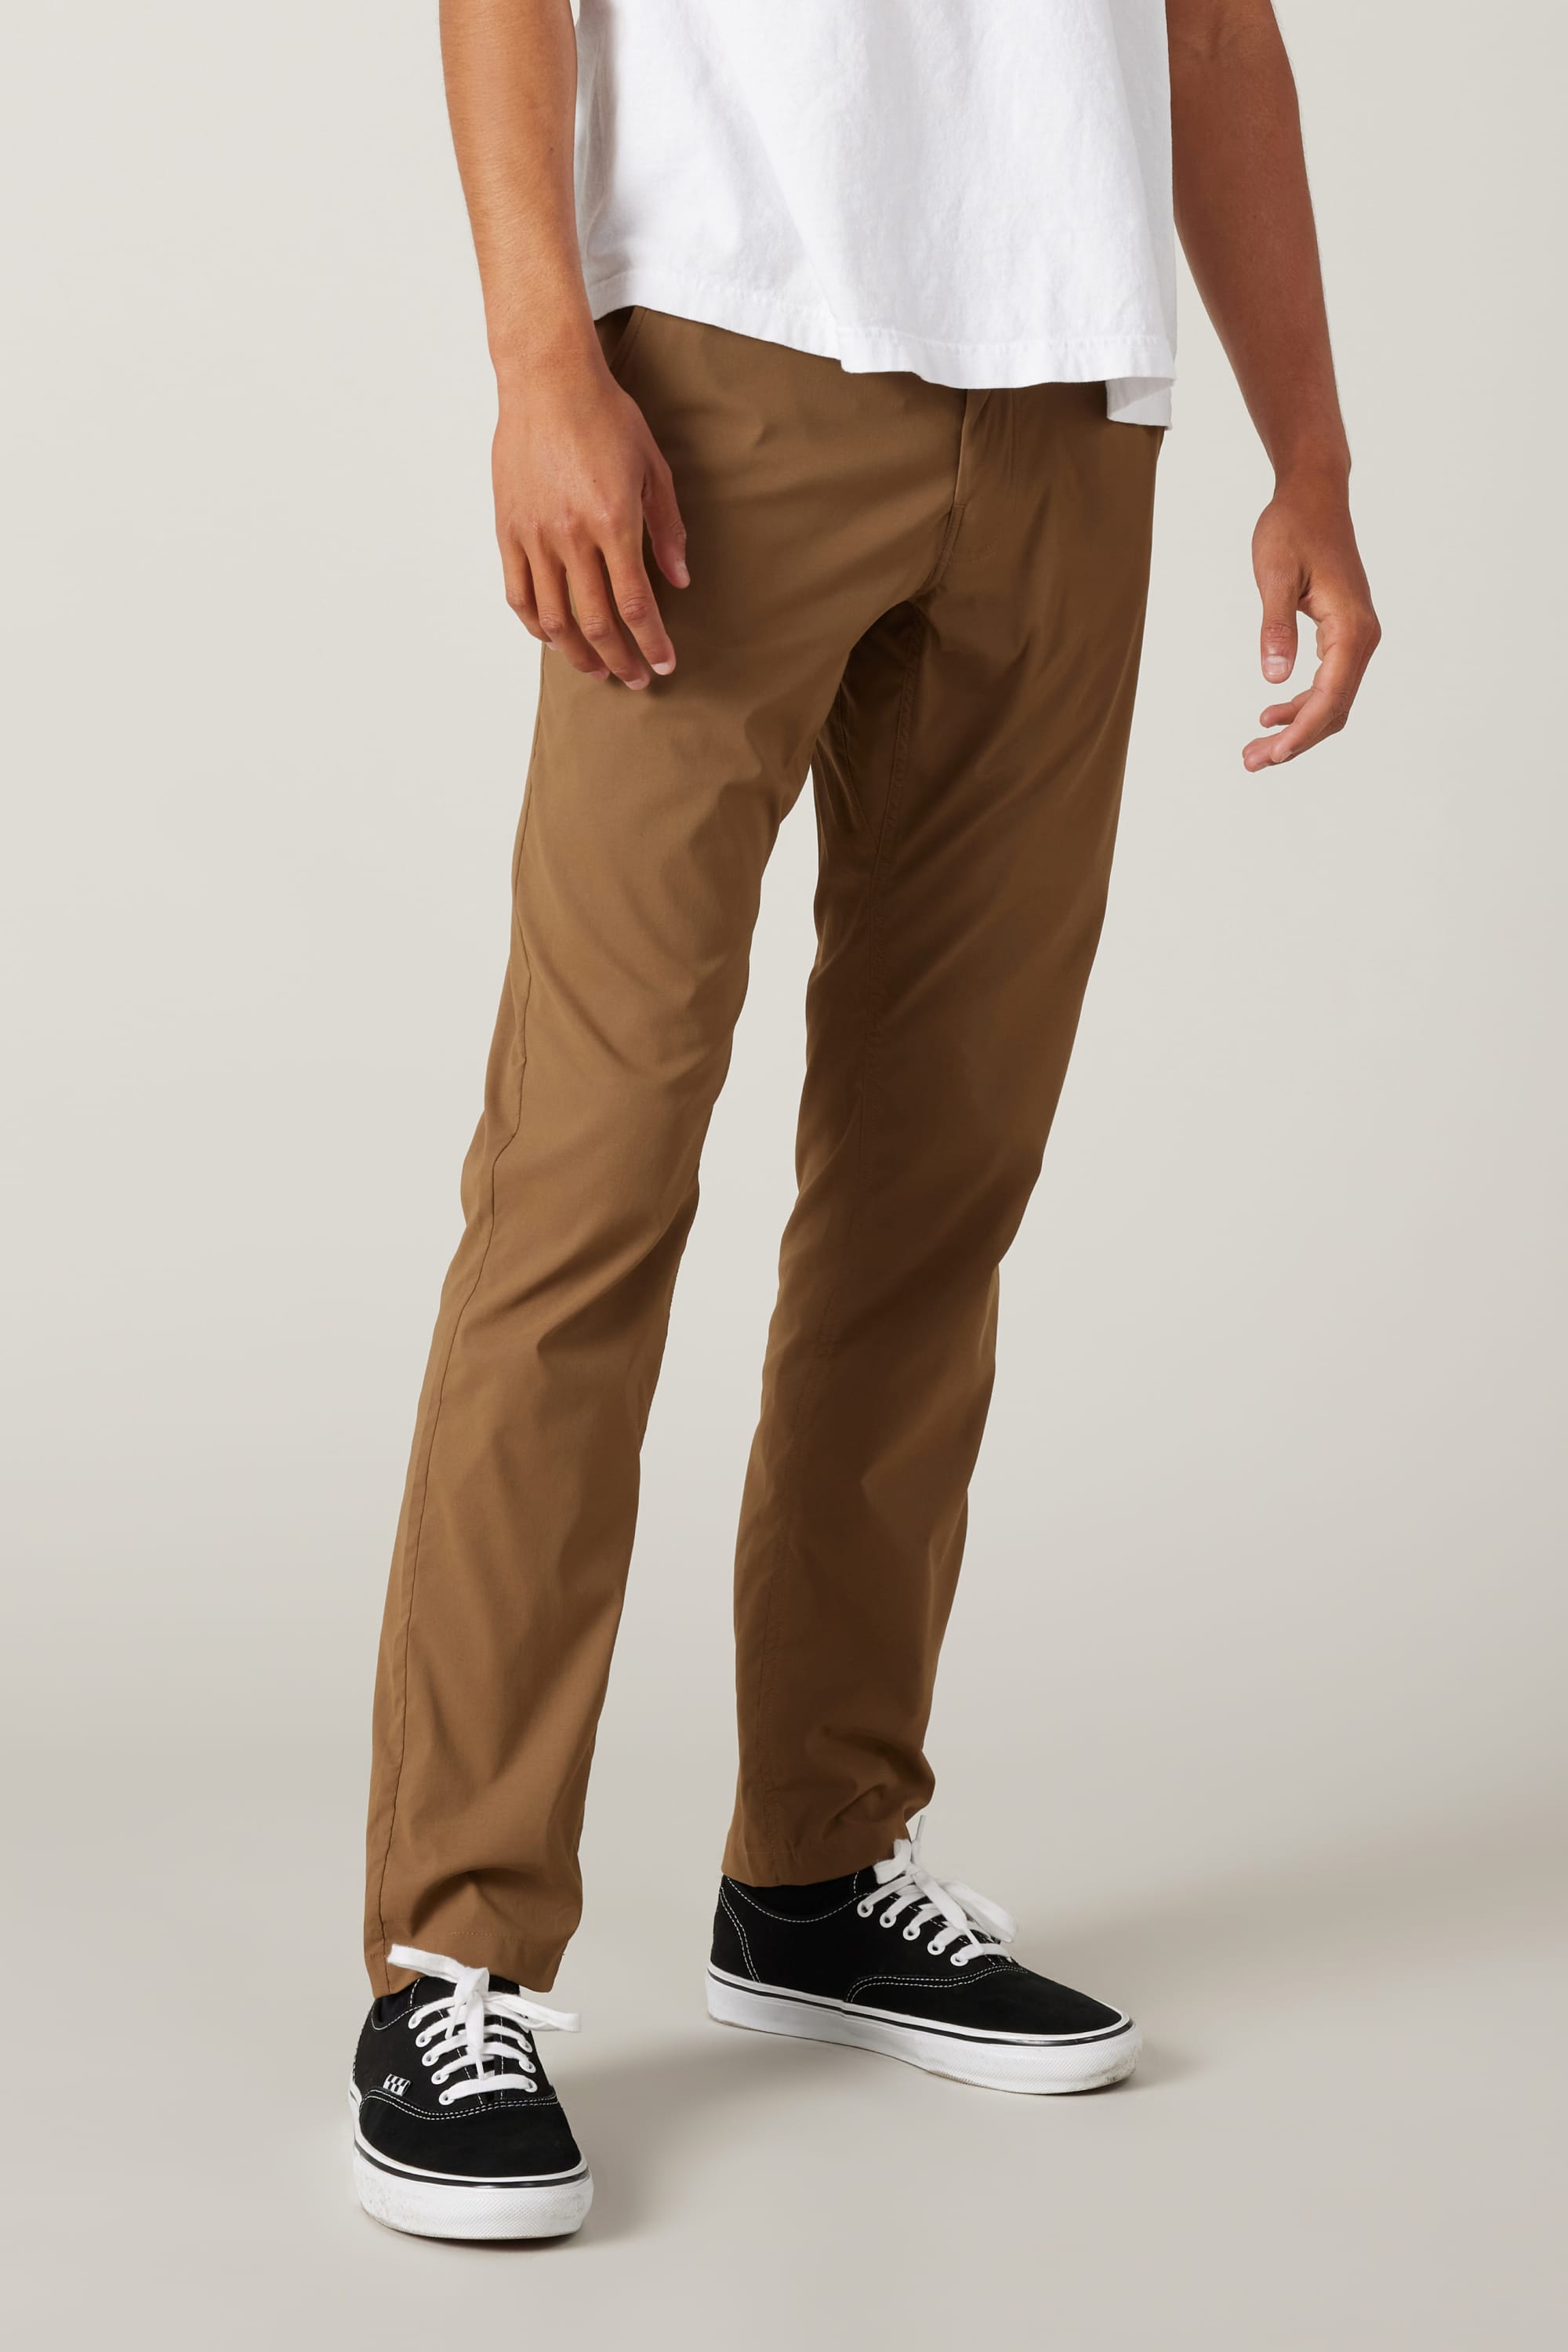 The Active Series™ Everyday Pant